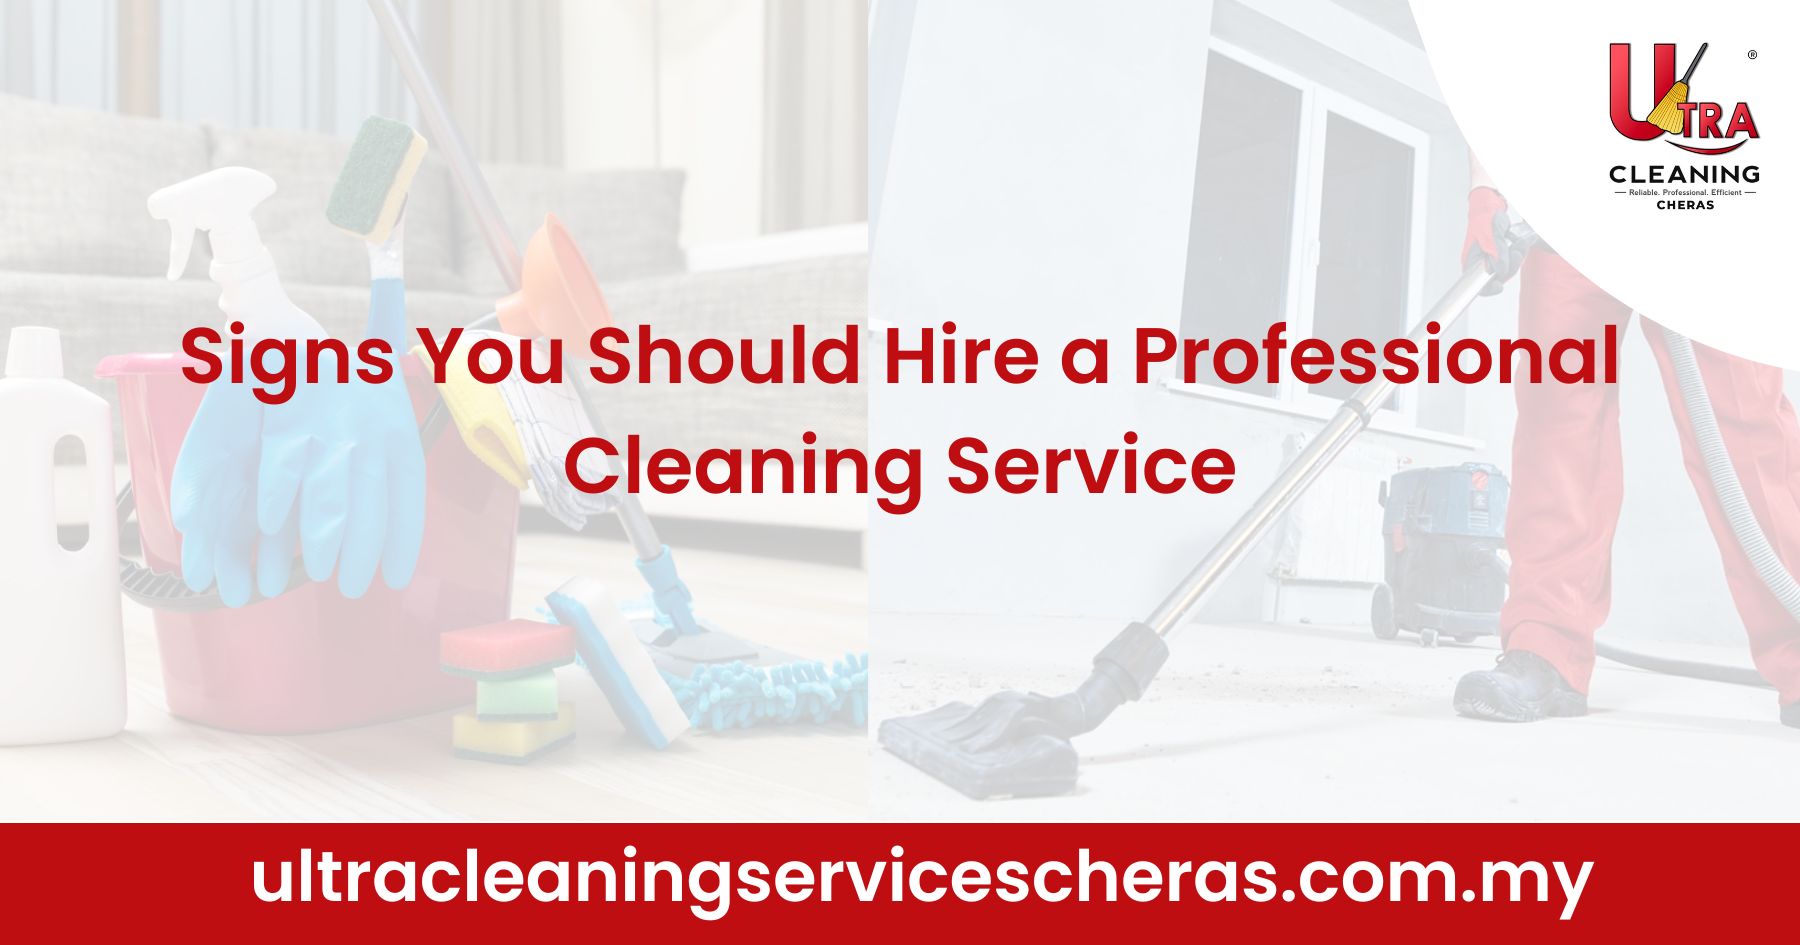 Signs You Should Hire a Professional Cleaning Service